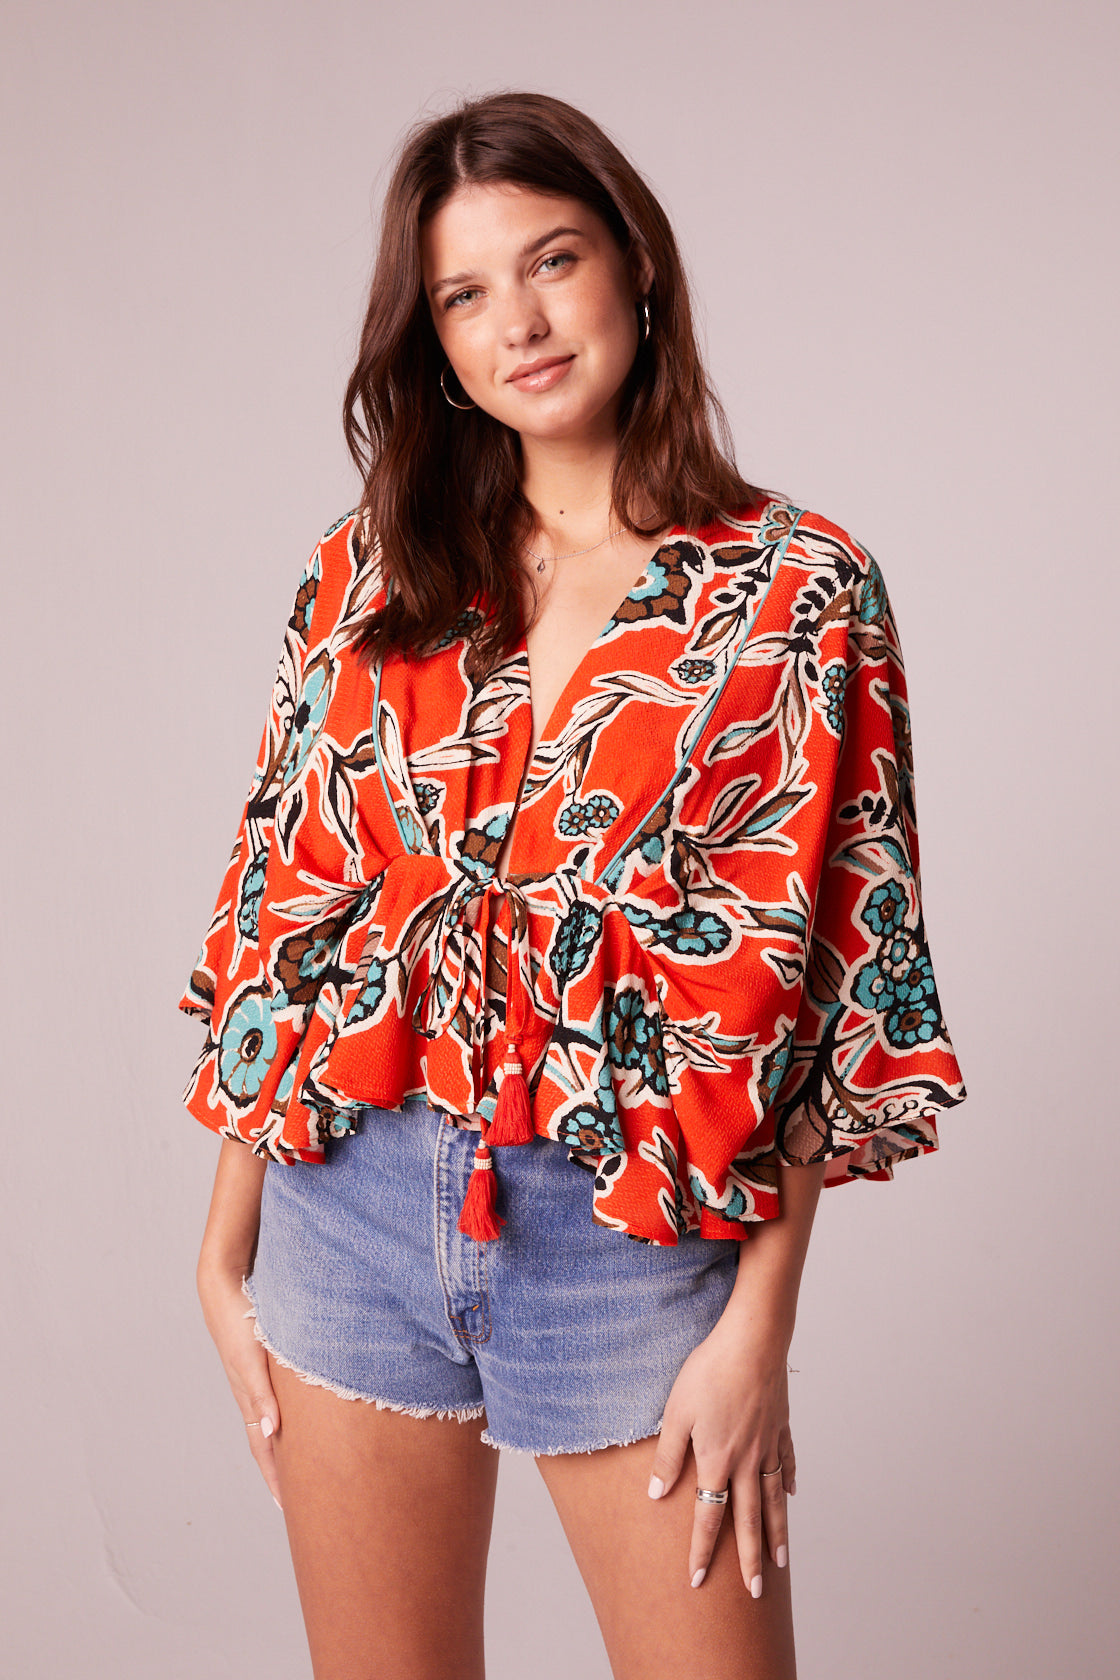 Leticia Tangerine Floral Batwing Top - band of the free